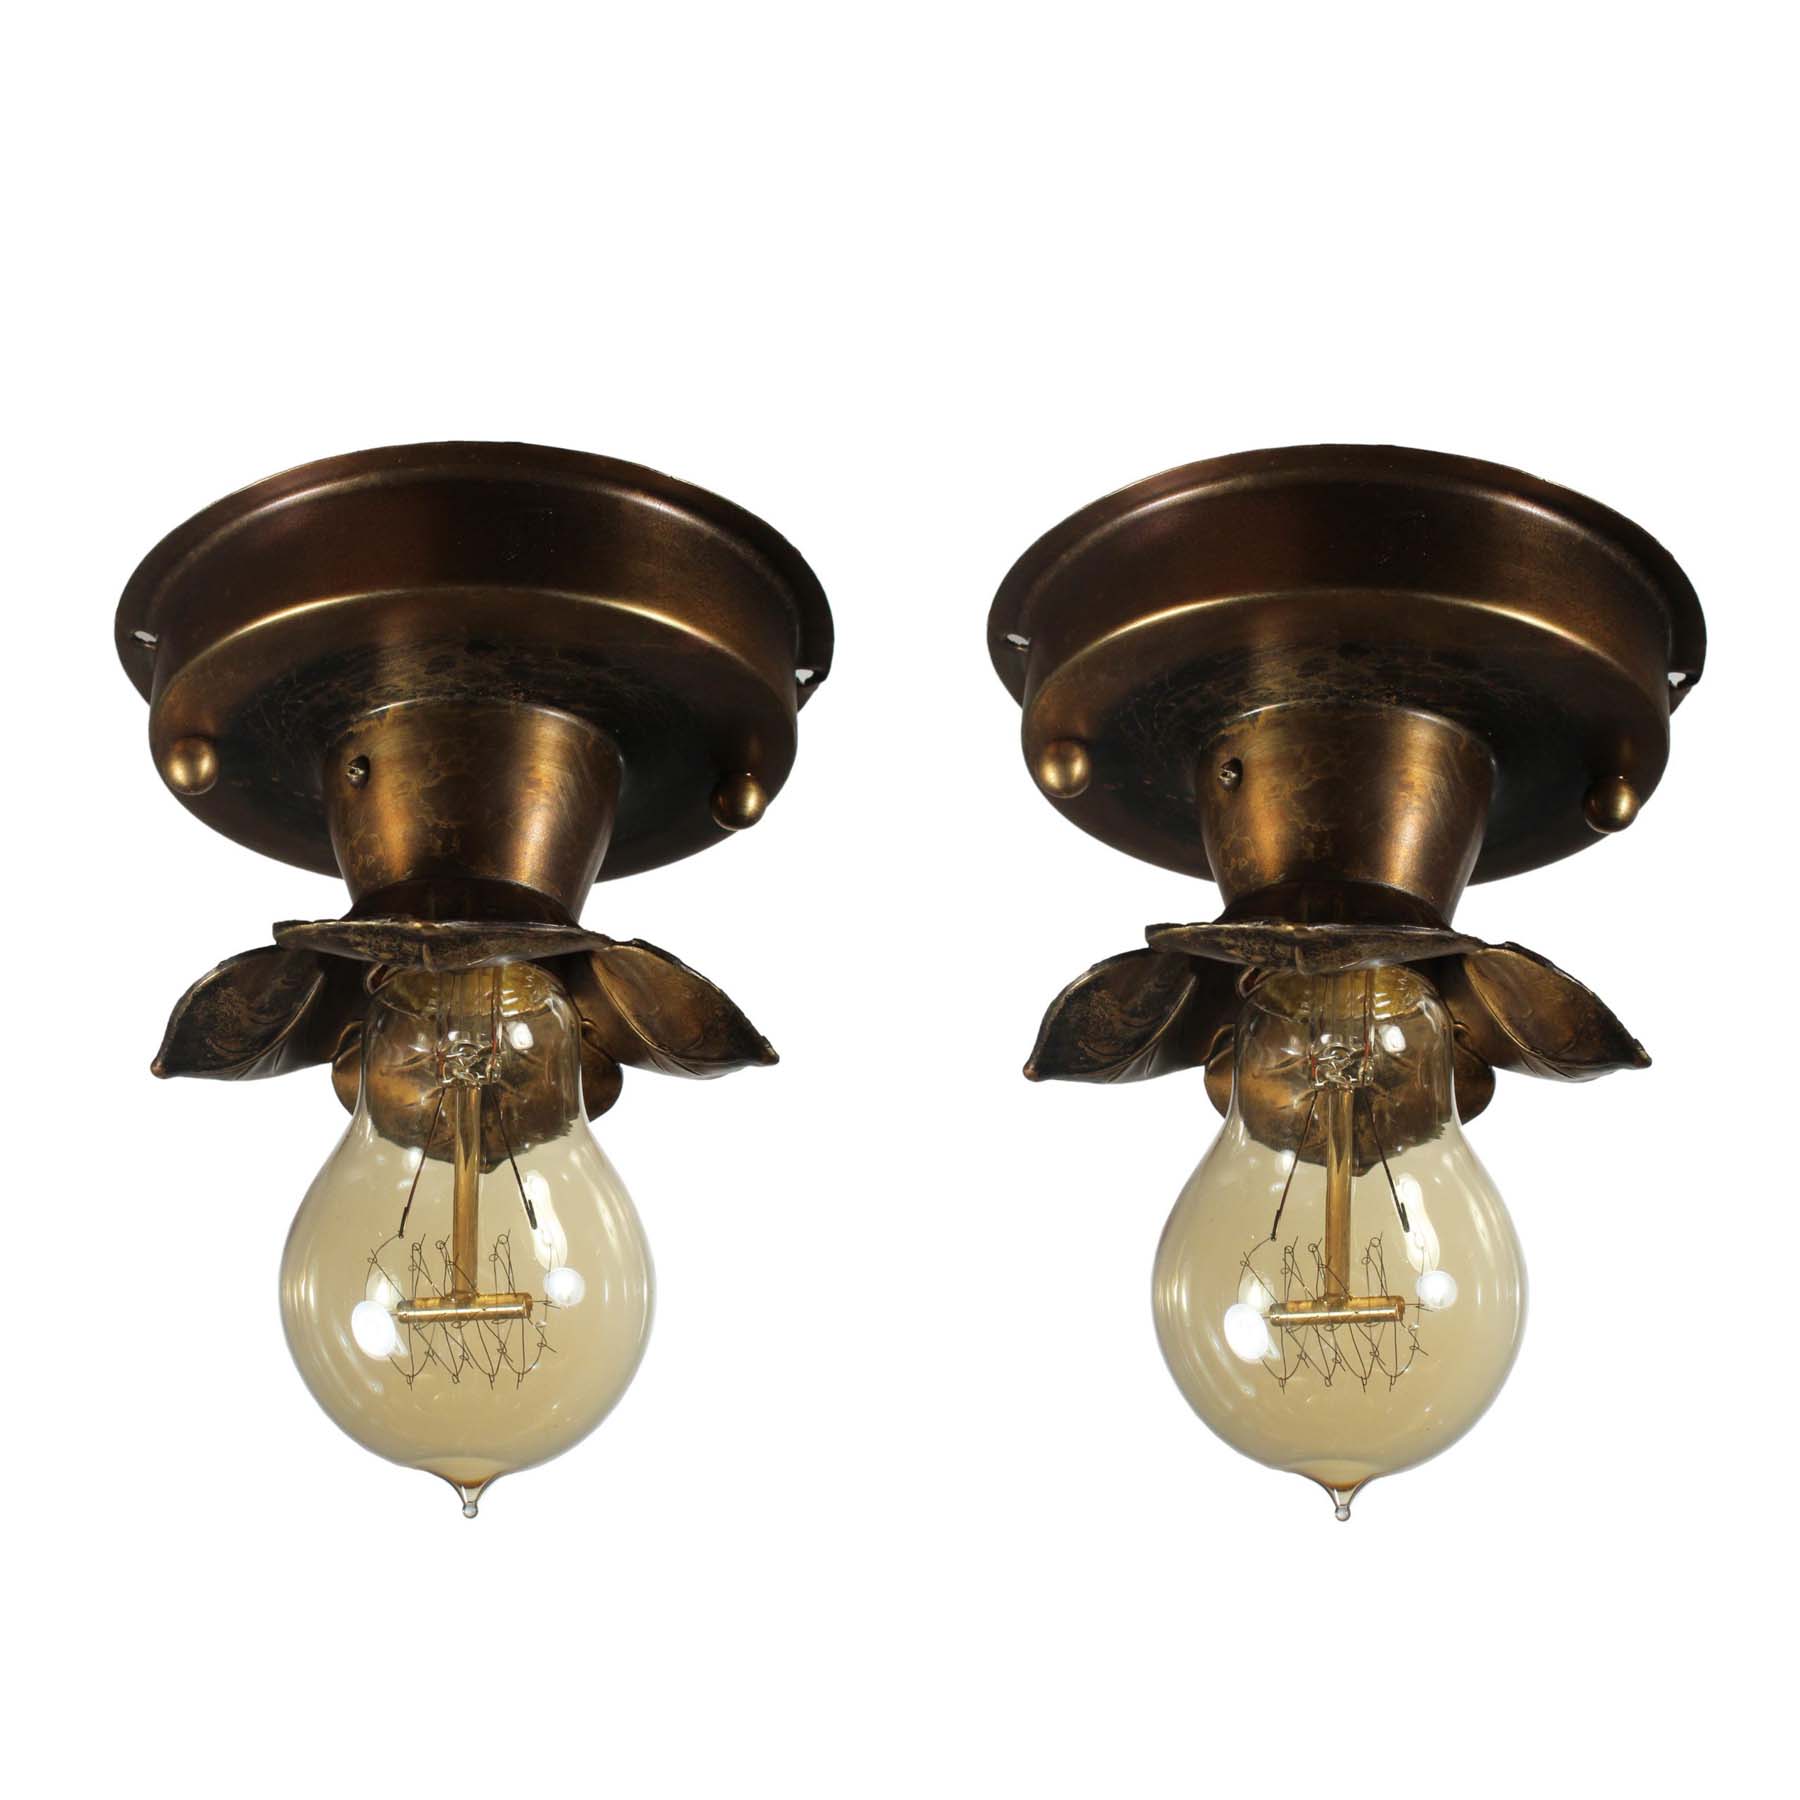 SOLD Brass Flush-Mount Lights with Exposed Bulbs, Antique Lighting-0